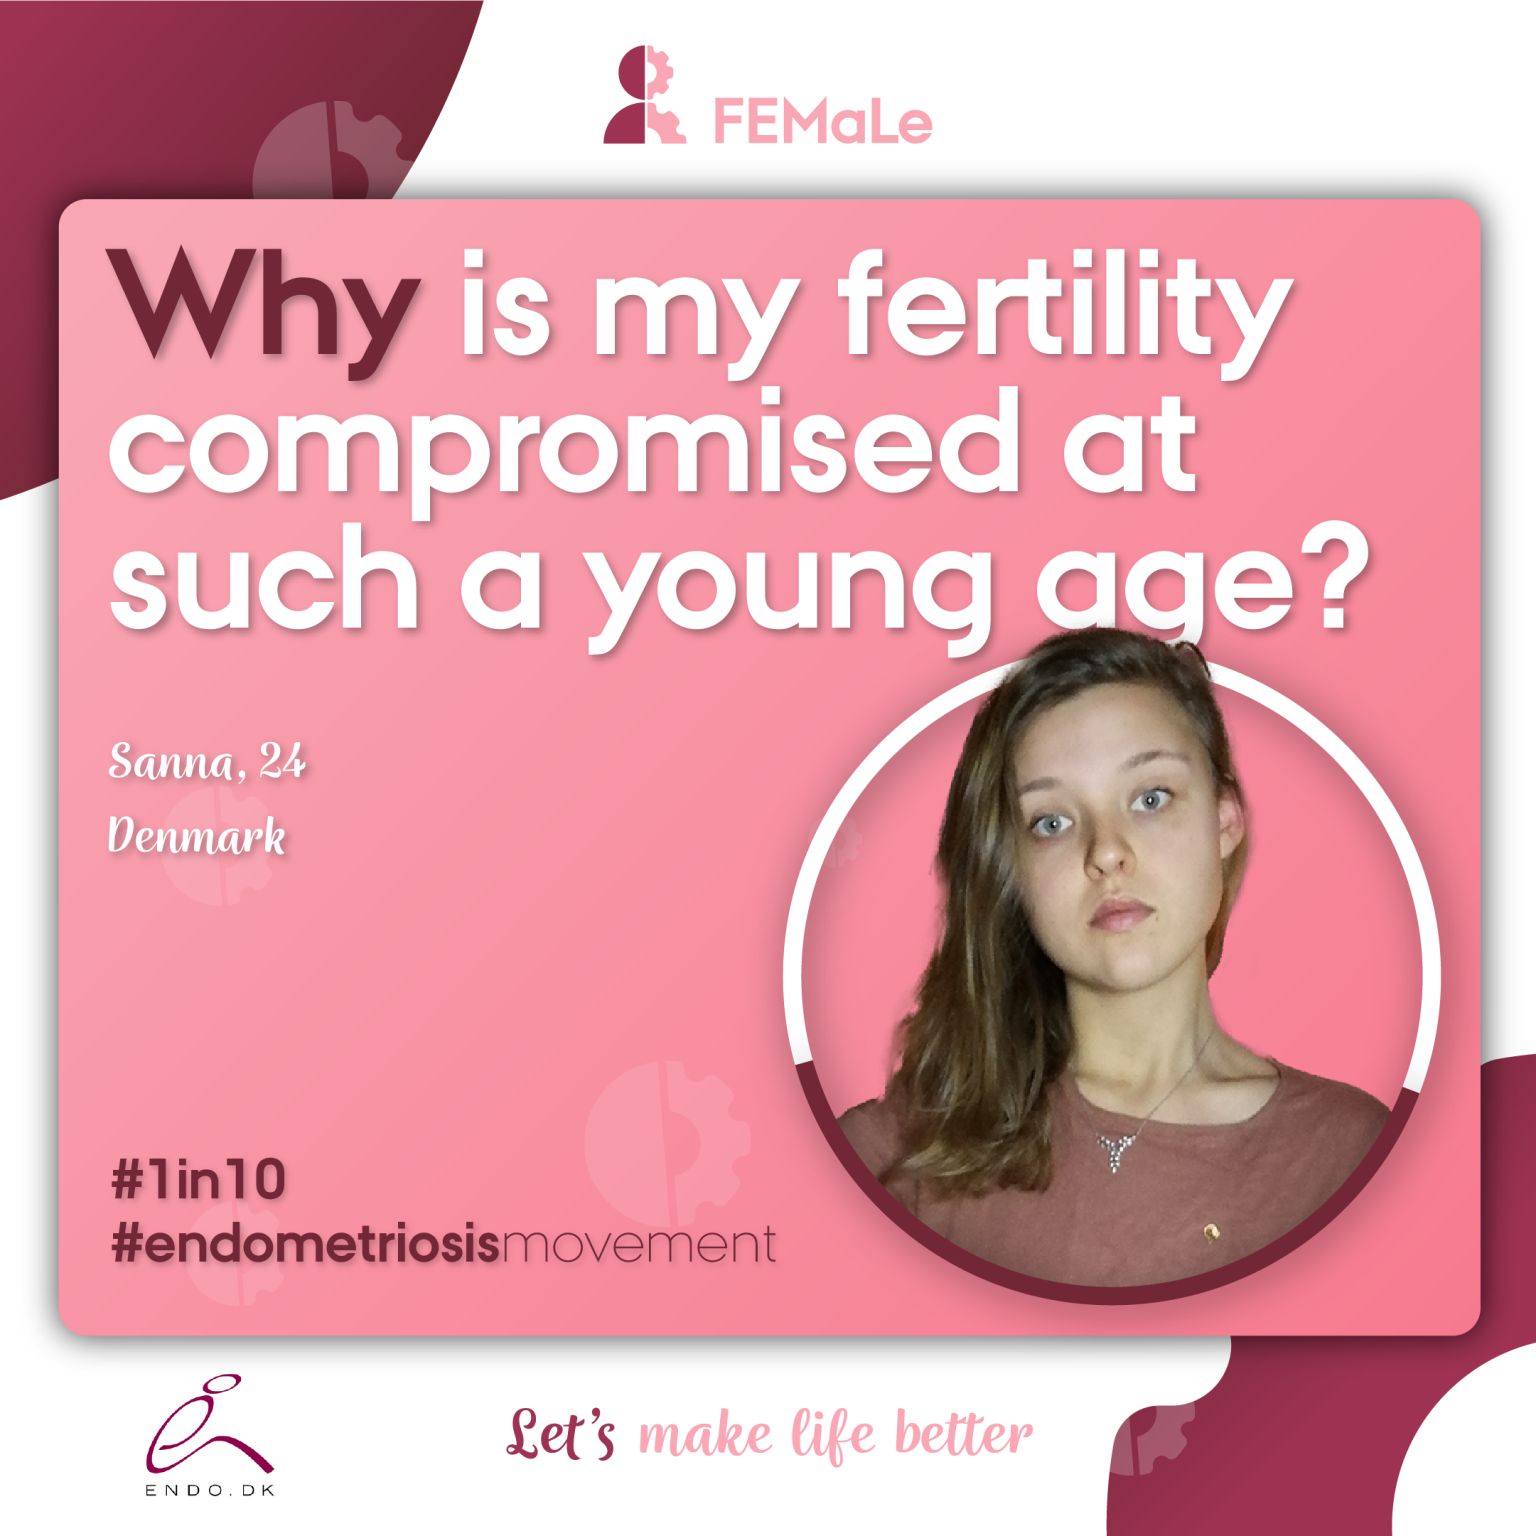 Why is my fertility compromised at such a young age?